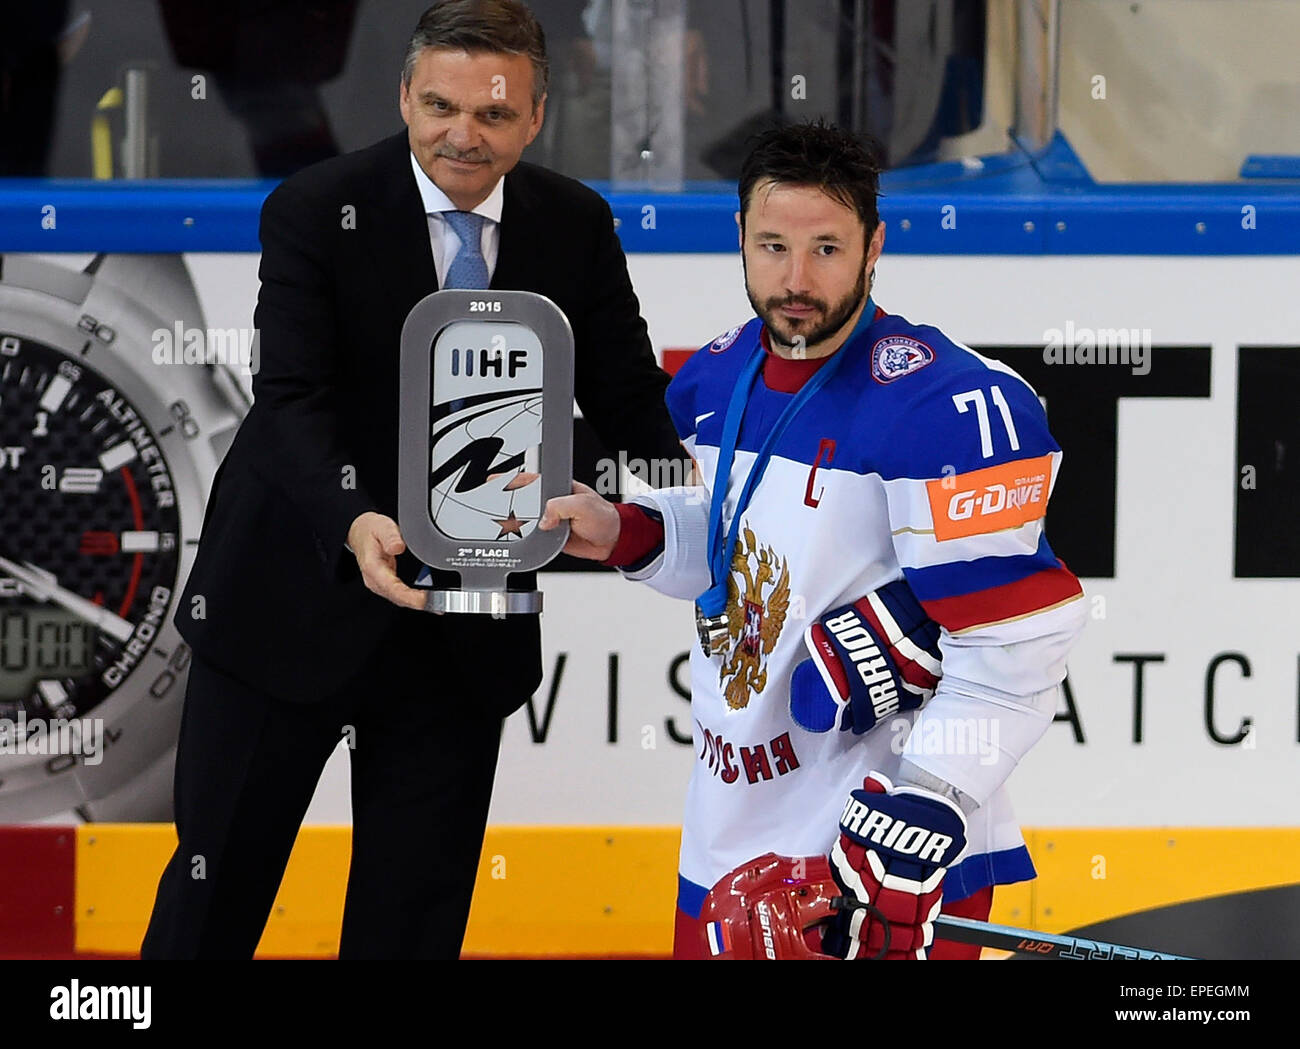 Russian Team Captain Ilya Kovalchuk Receives The Second Place Trophy From Iihf President Rene